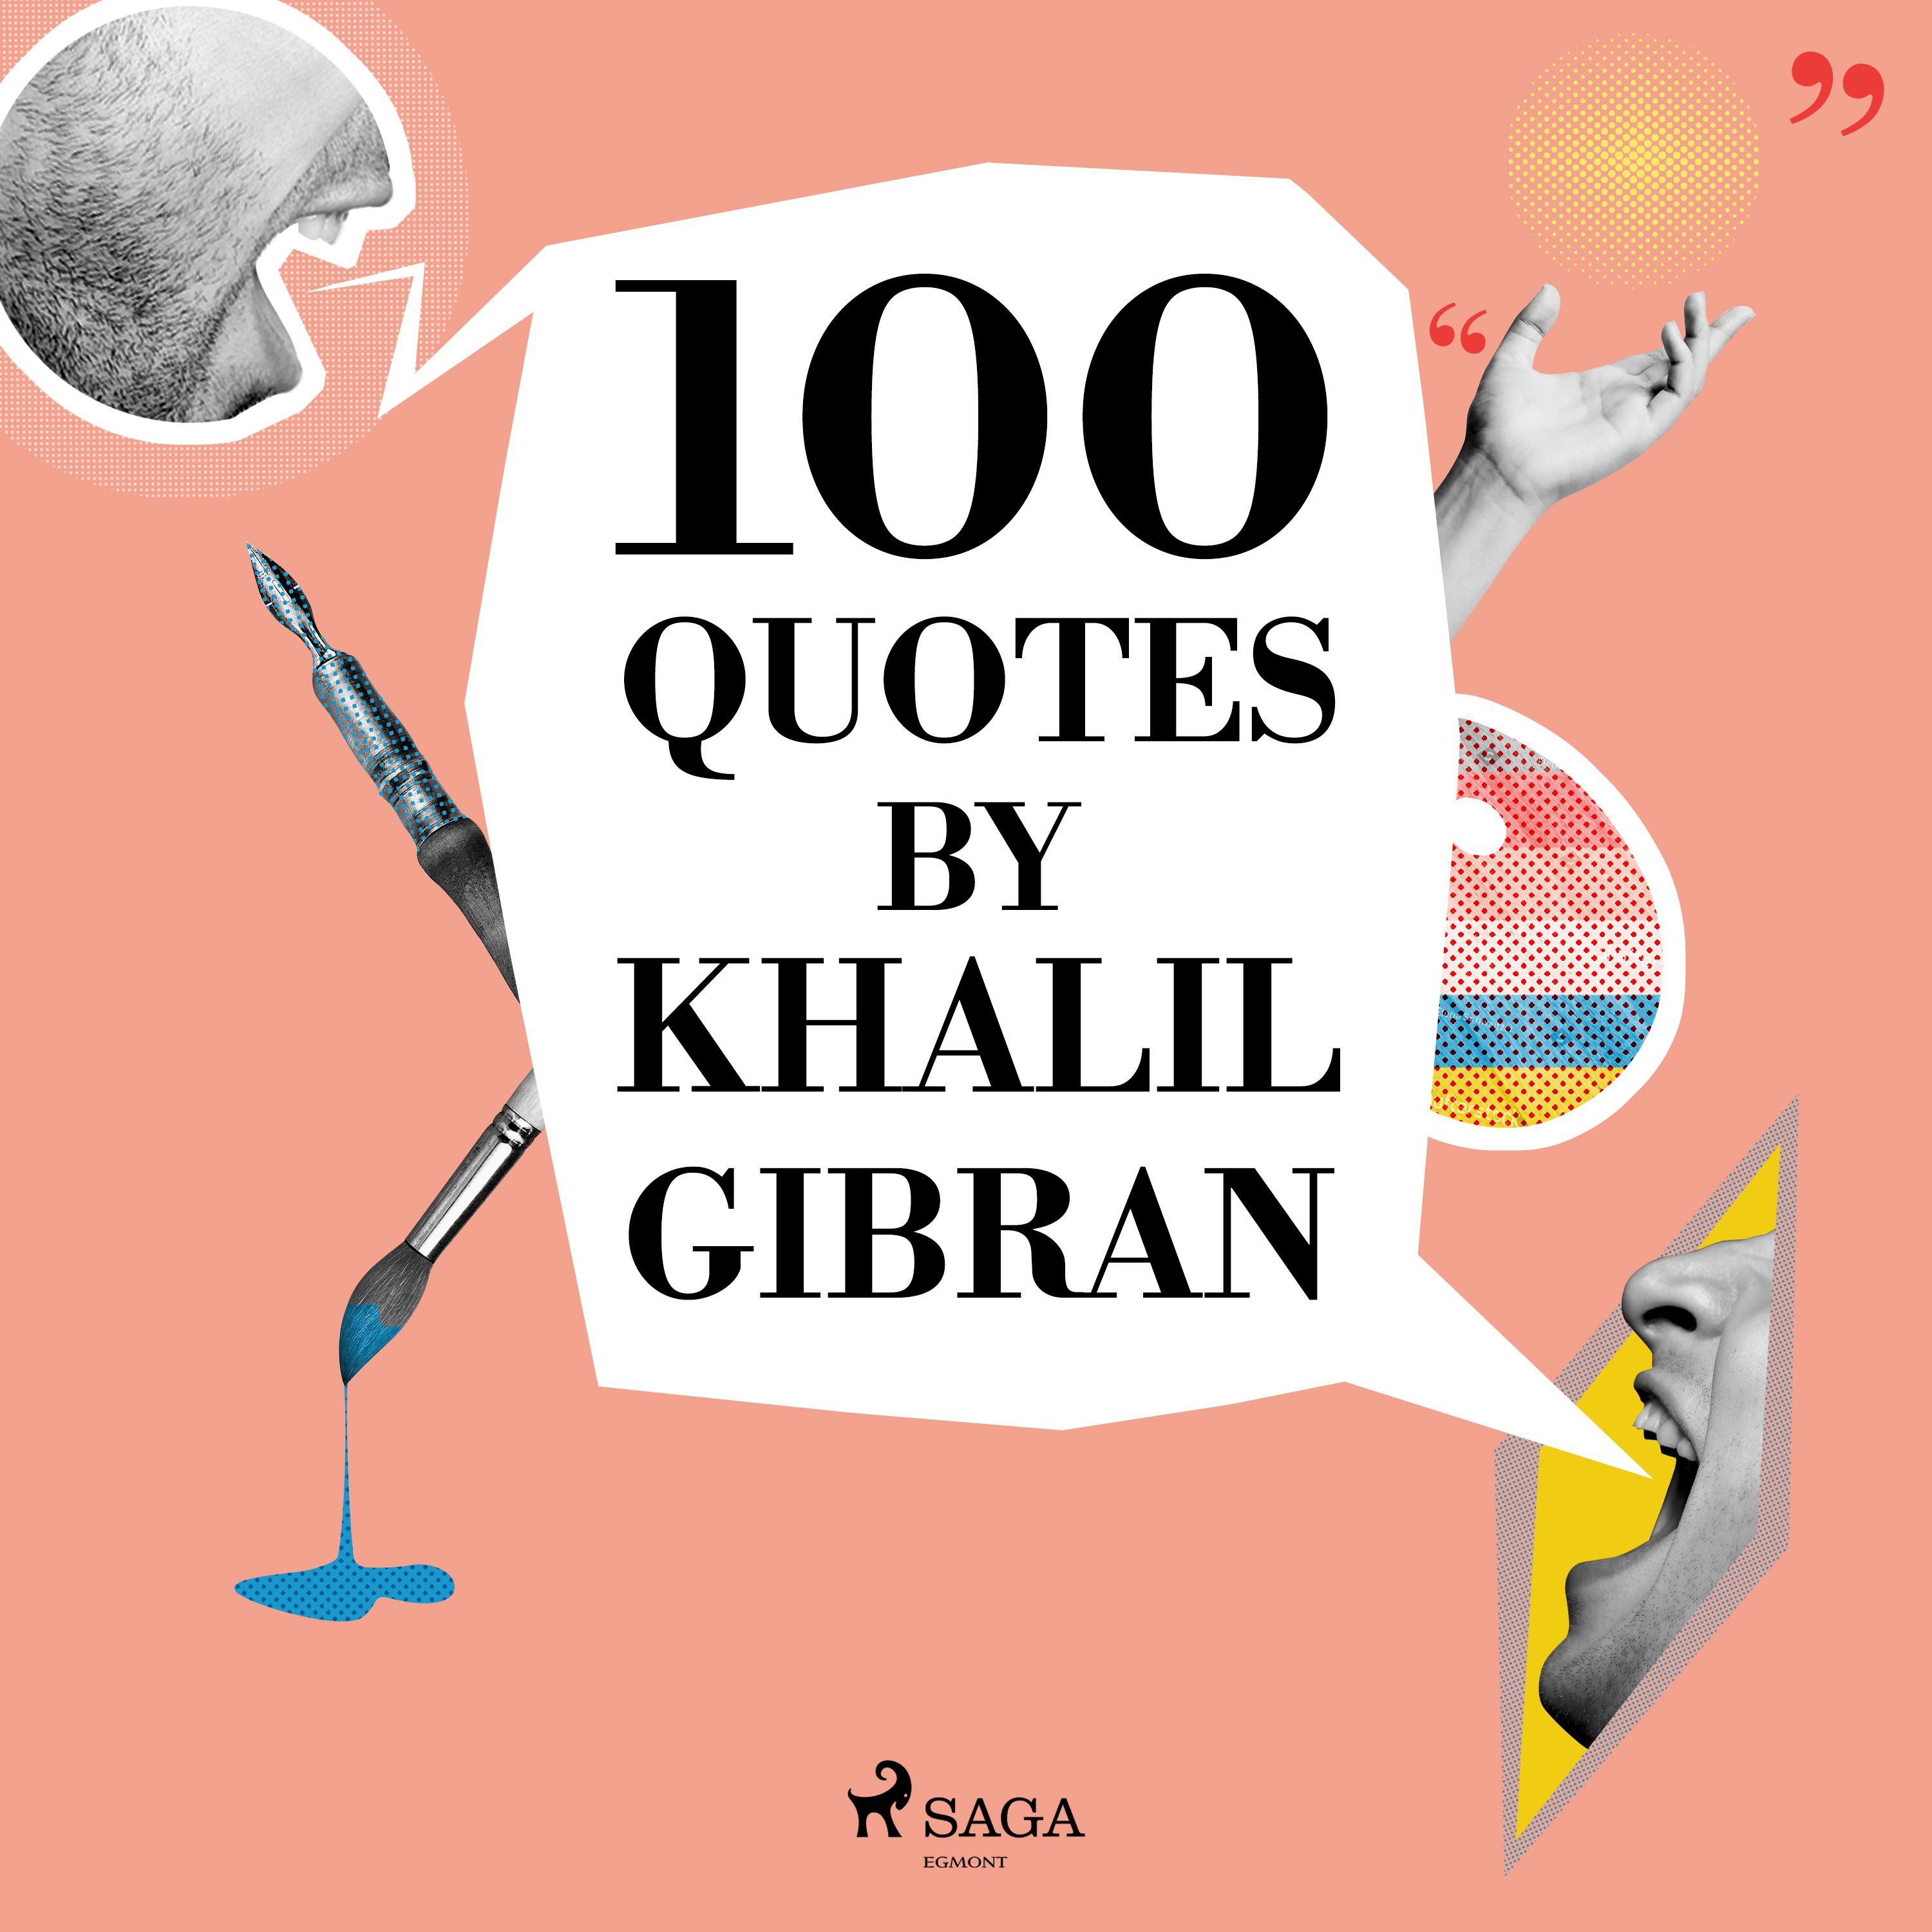 100 Quotes by Khalil Gibran, audiobook by Khalil Gibran